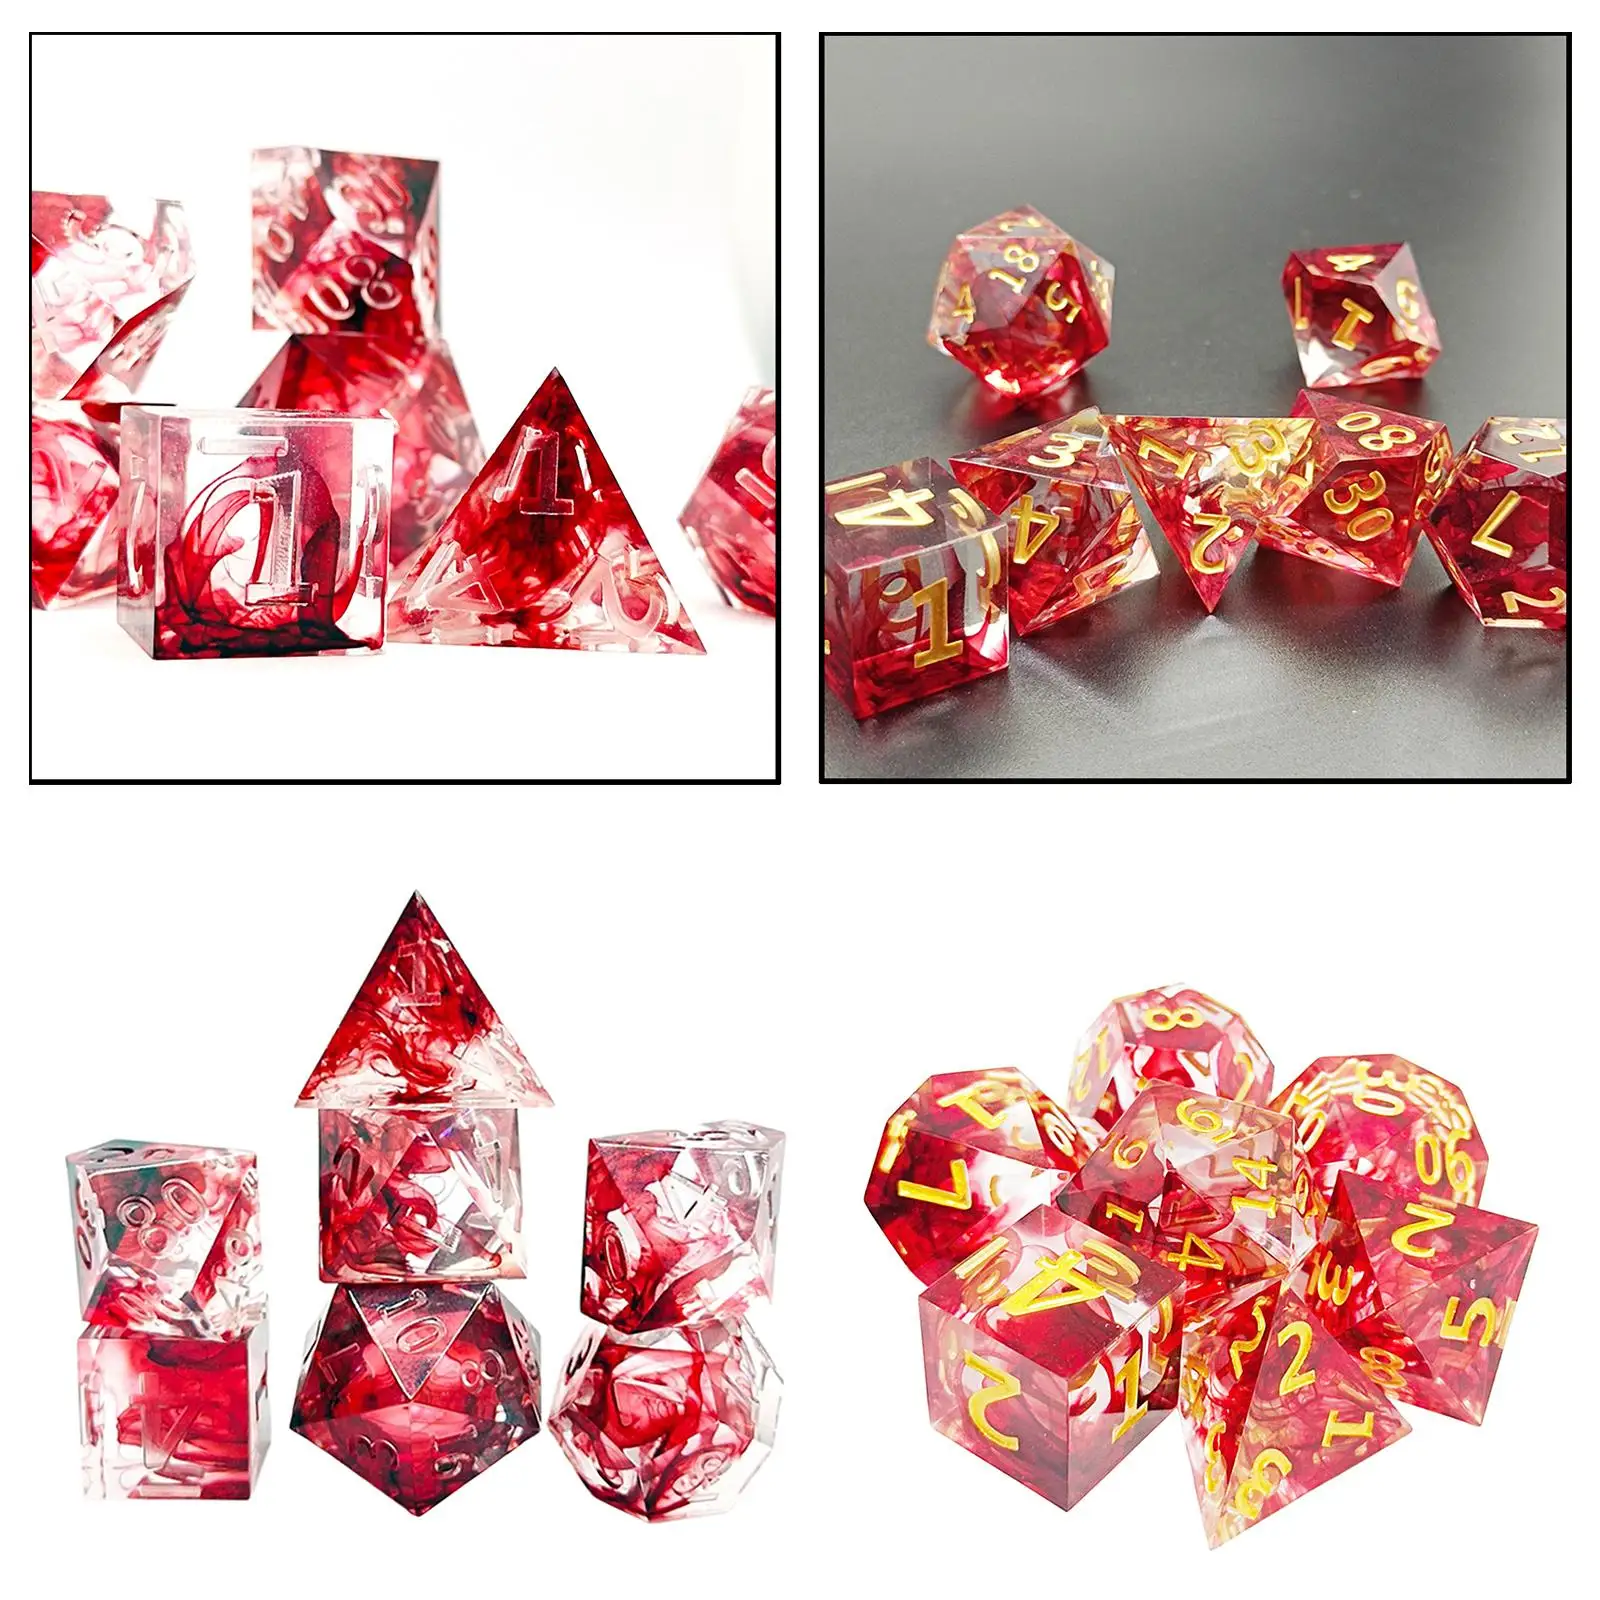 Pack of 7 Polyhedral Dice Crystal RPG Role Playing Dice Blood Effect Acute Angle for Shadow Run RPG Dices Game Accessories